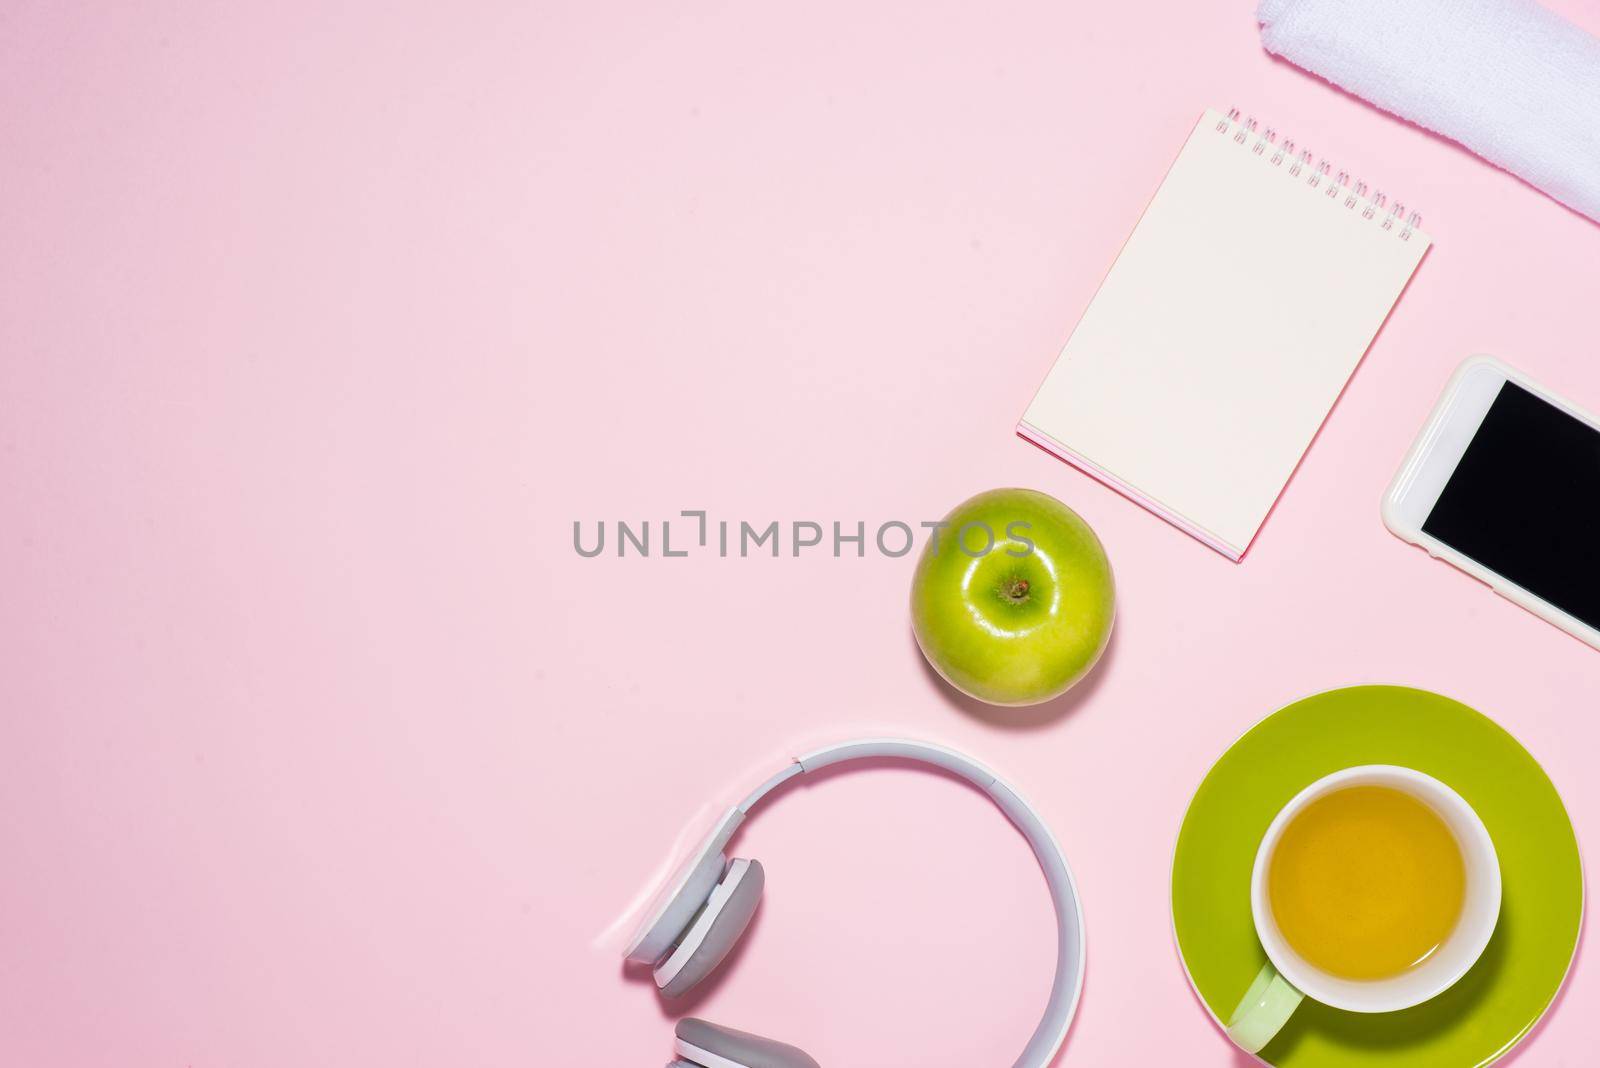 Healthy lifestyle concept. Sneakers, tea, apple and headphone on pastel color background.